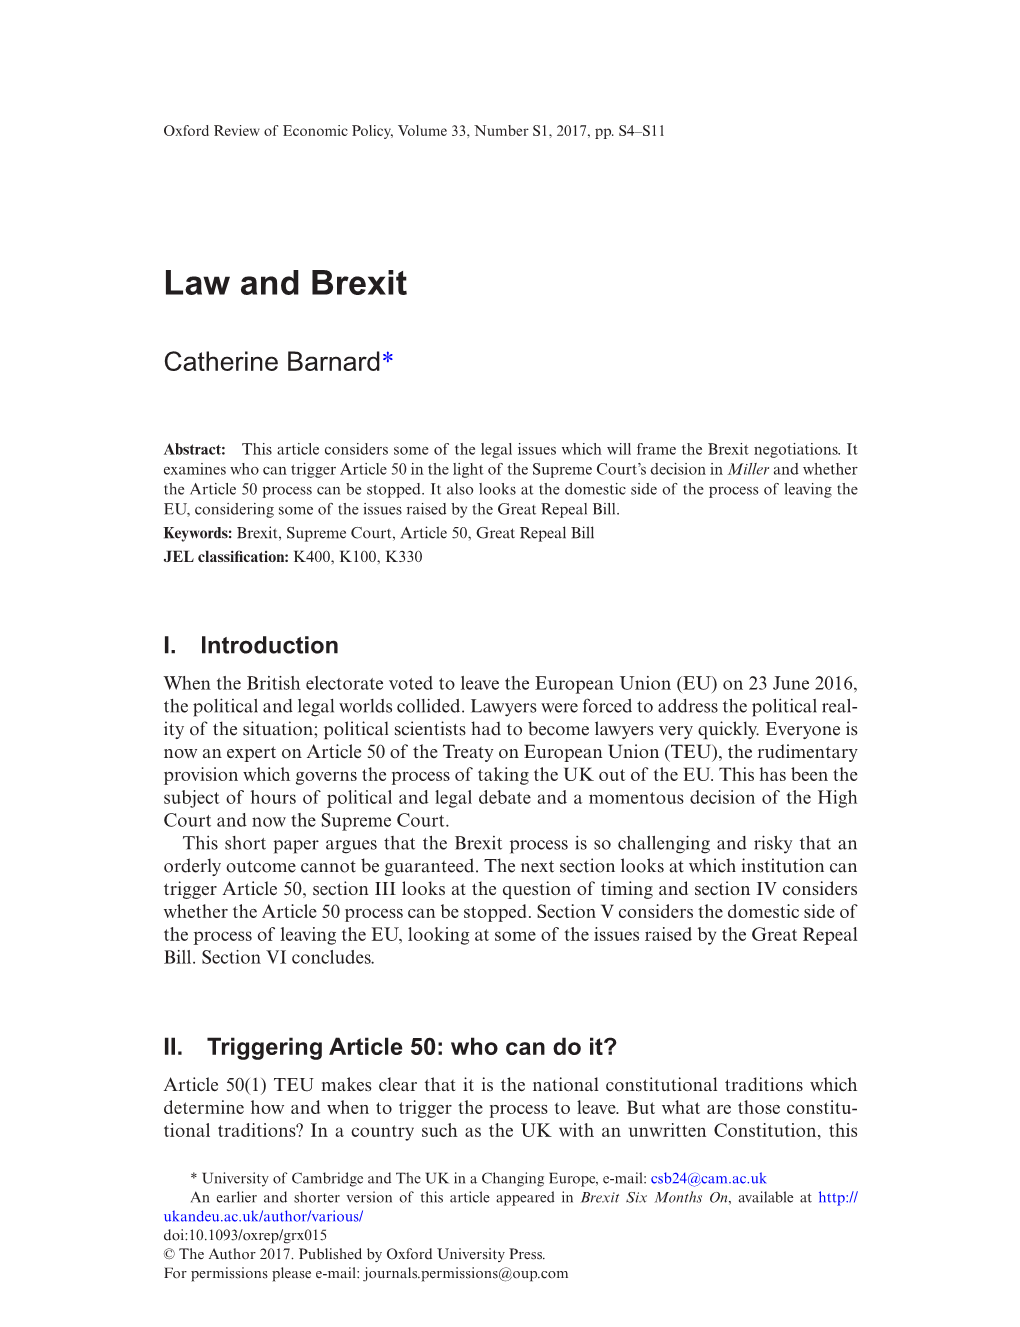 Law and Brexit